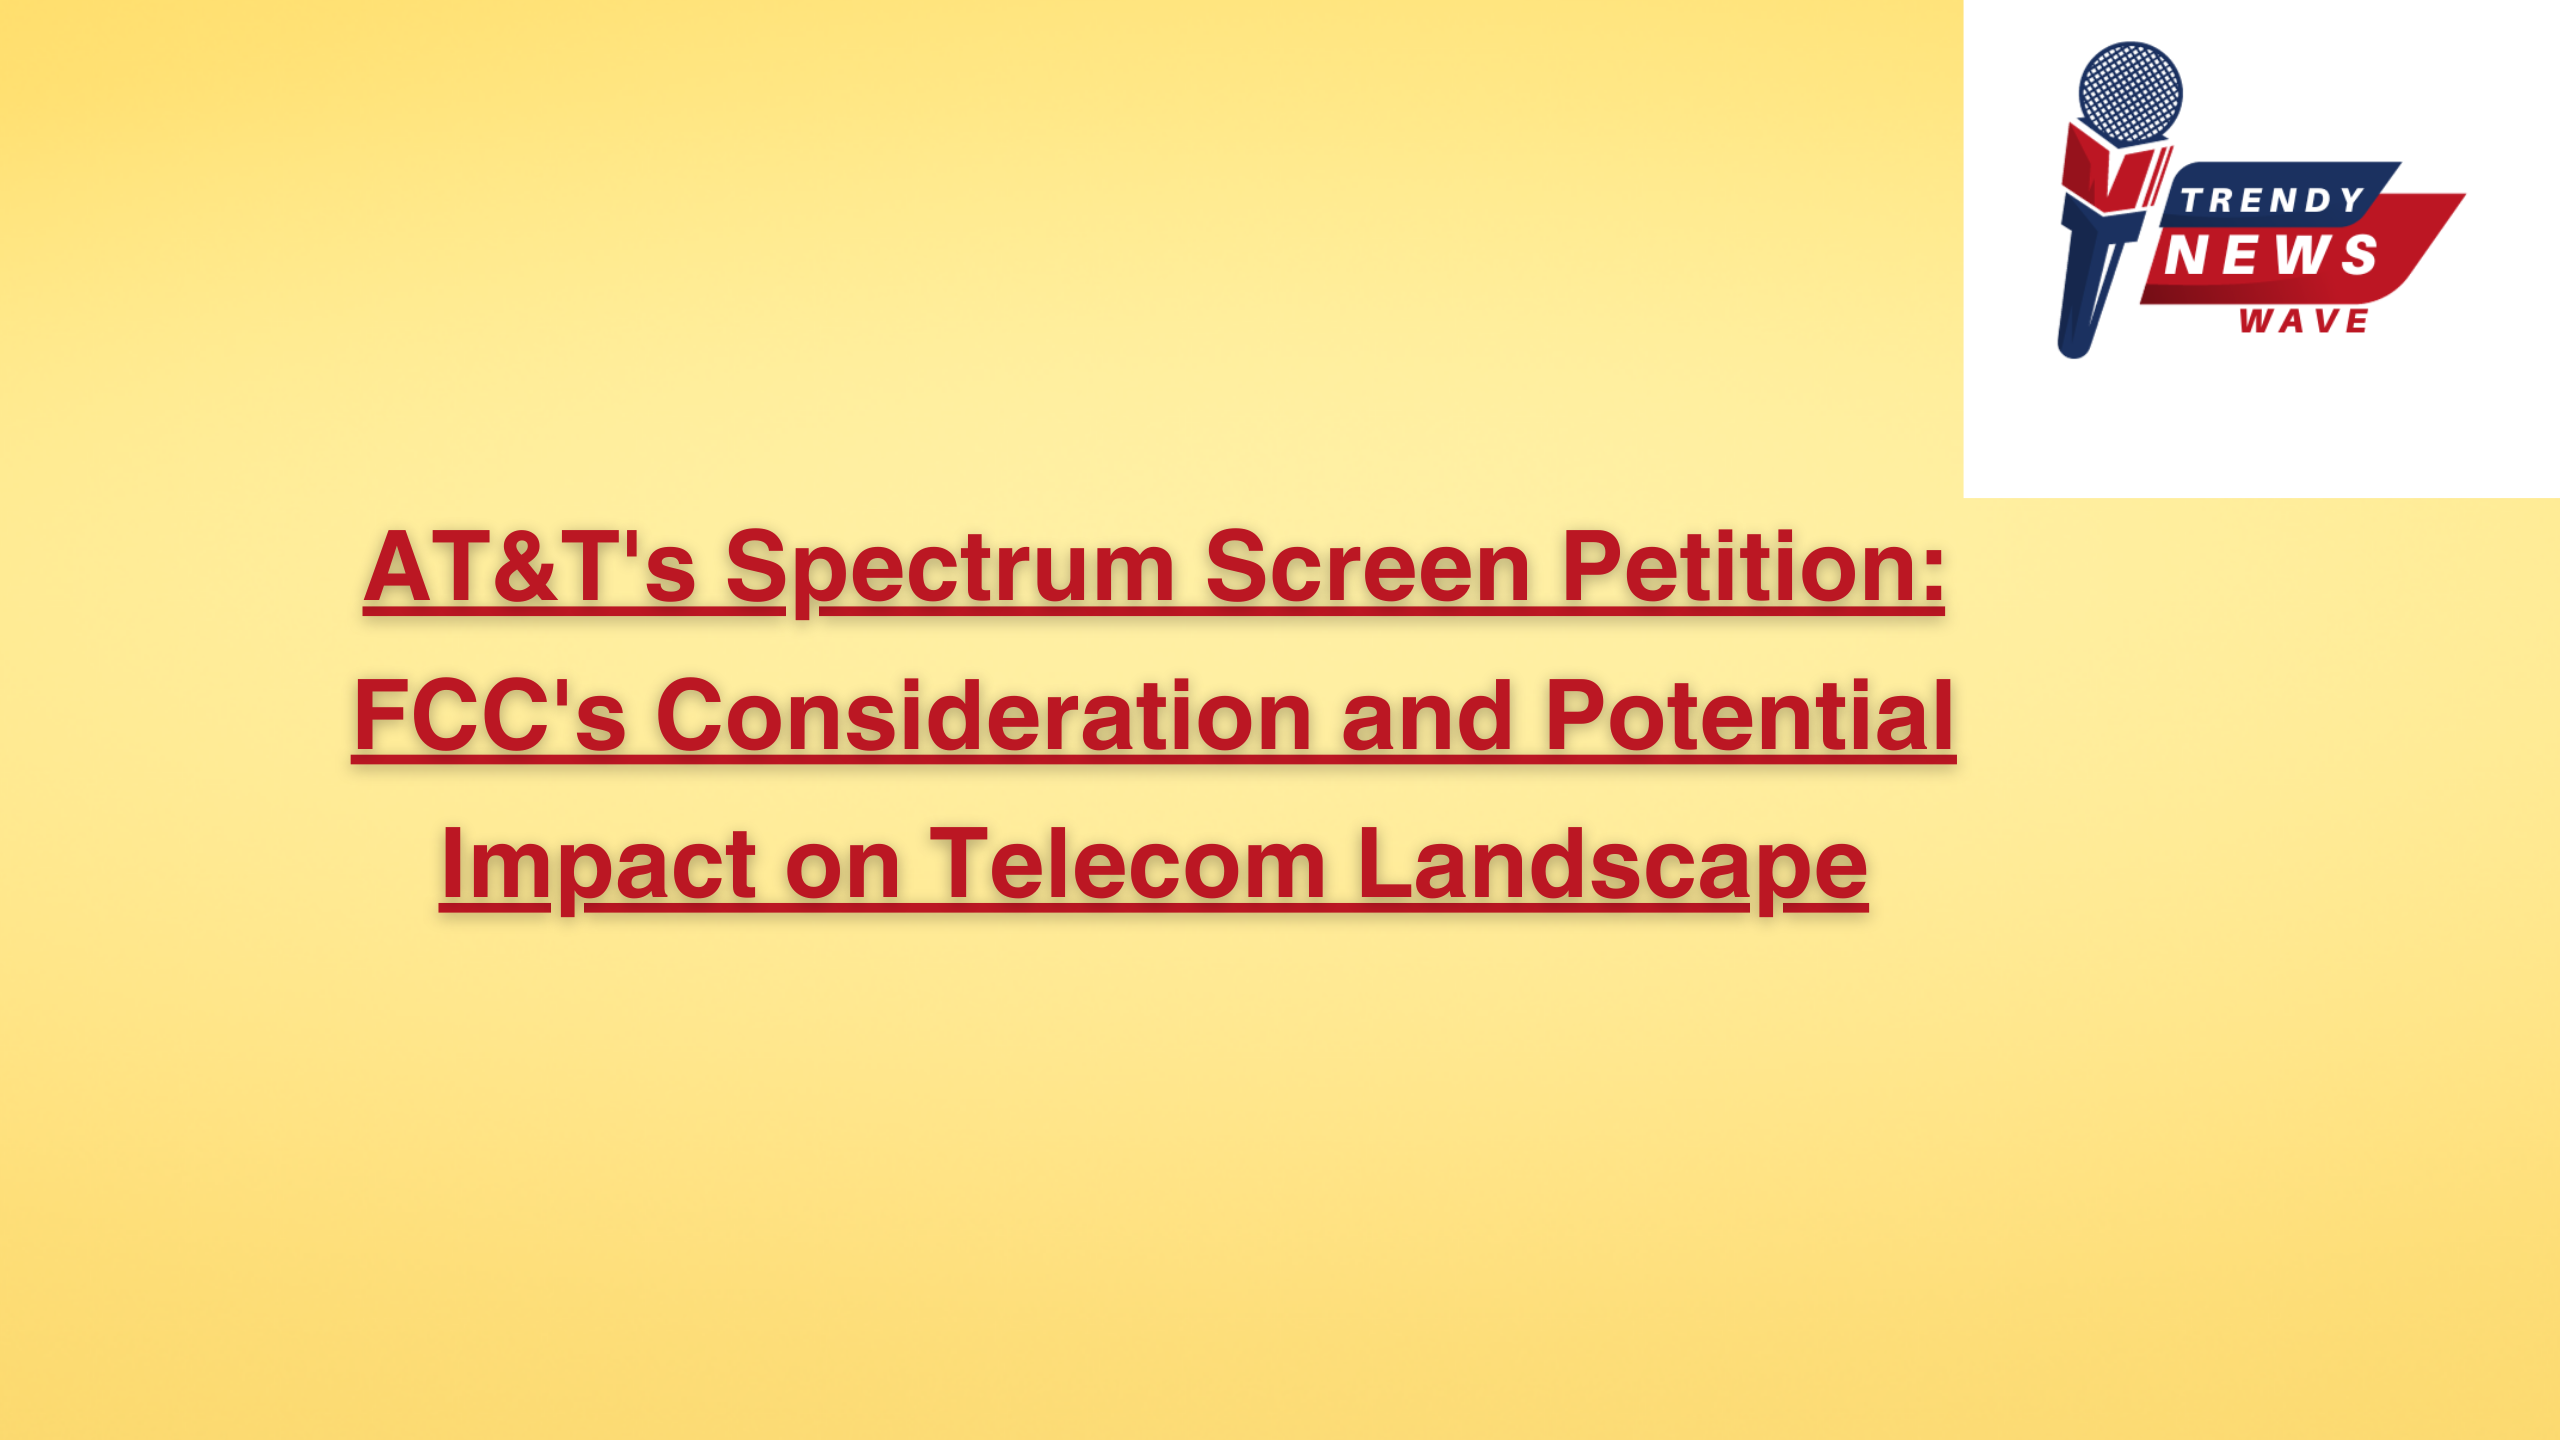 AT&T's Spectrum Screen Petition: FCC's Consideration and Potential Impact on Telecom Landscape